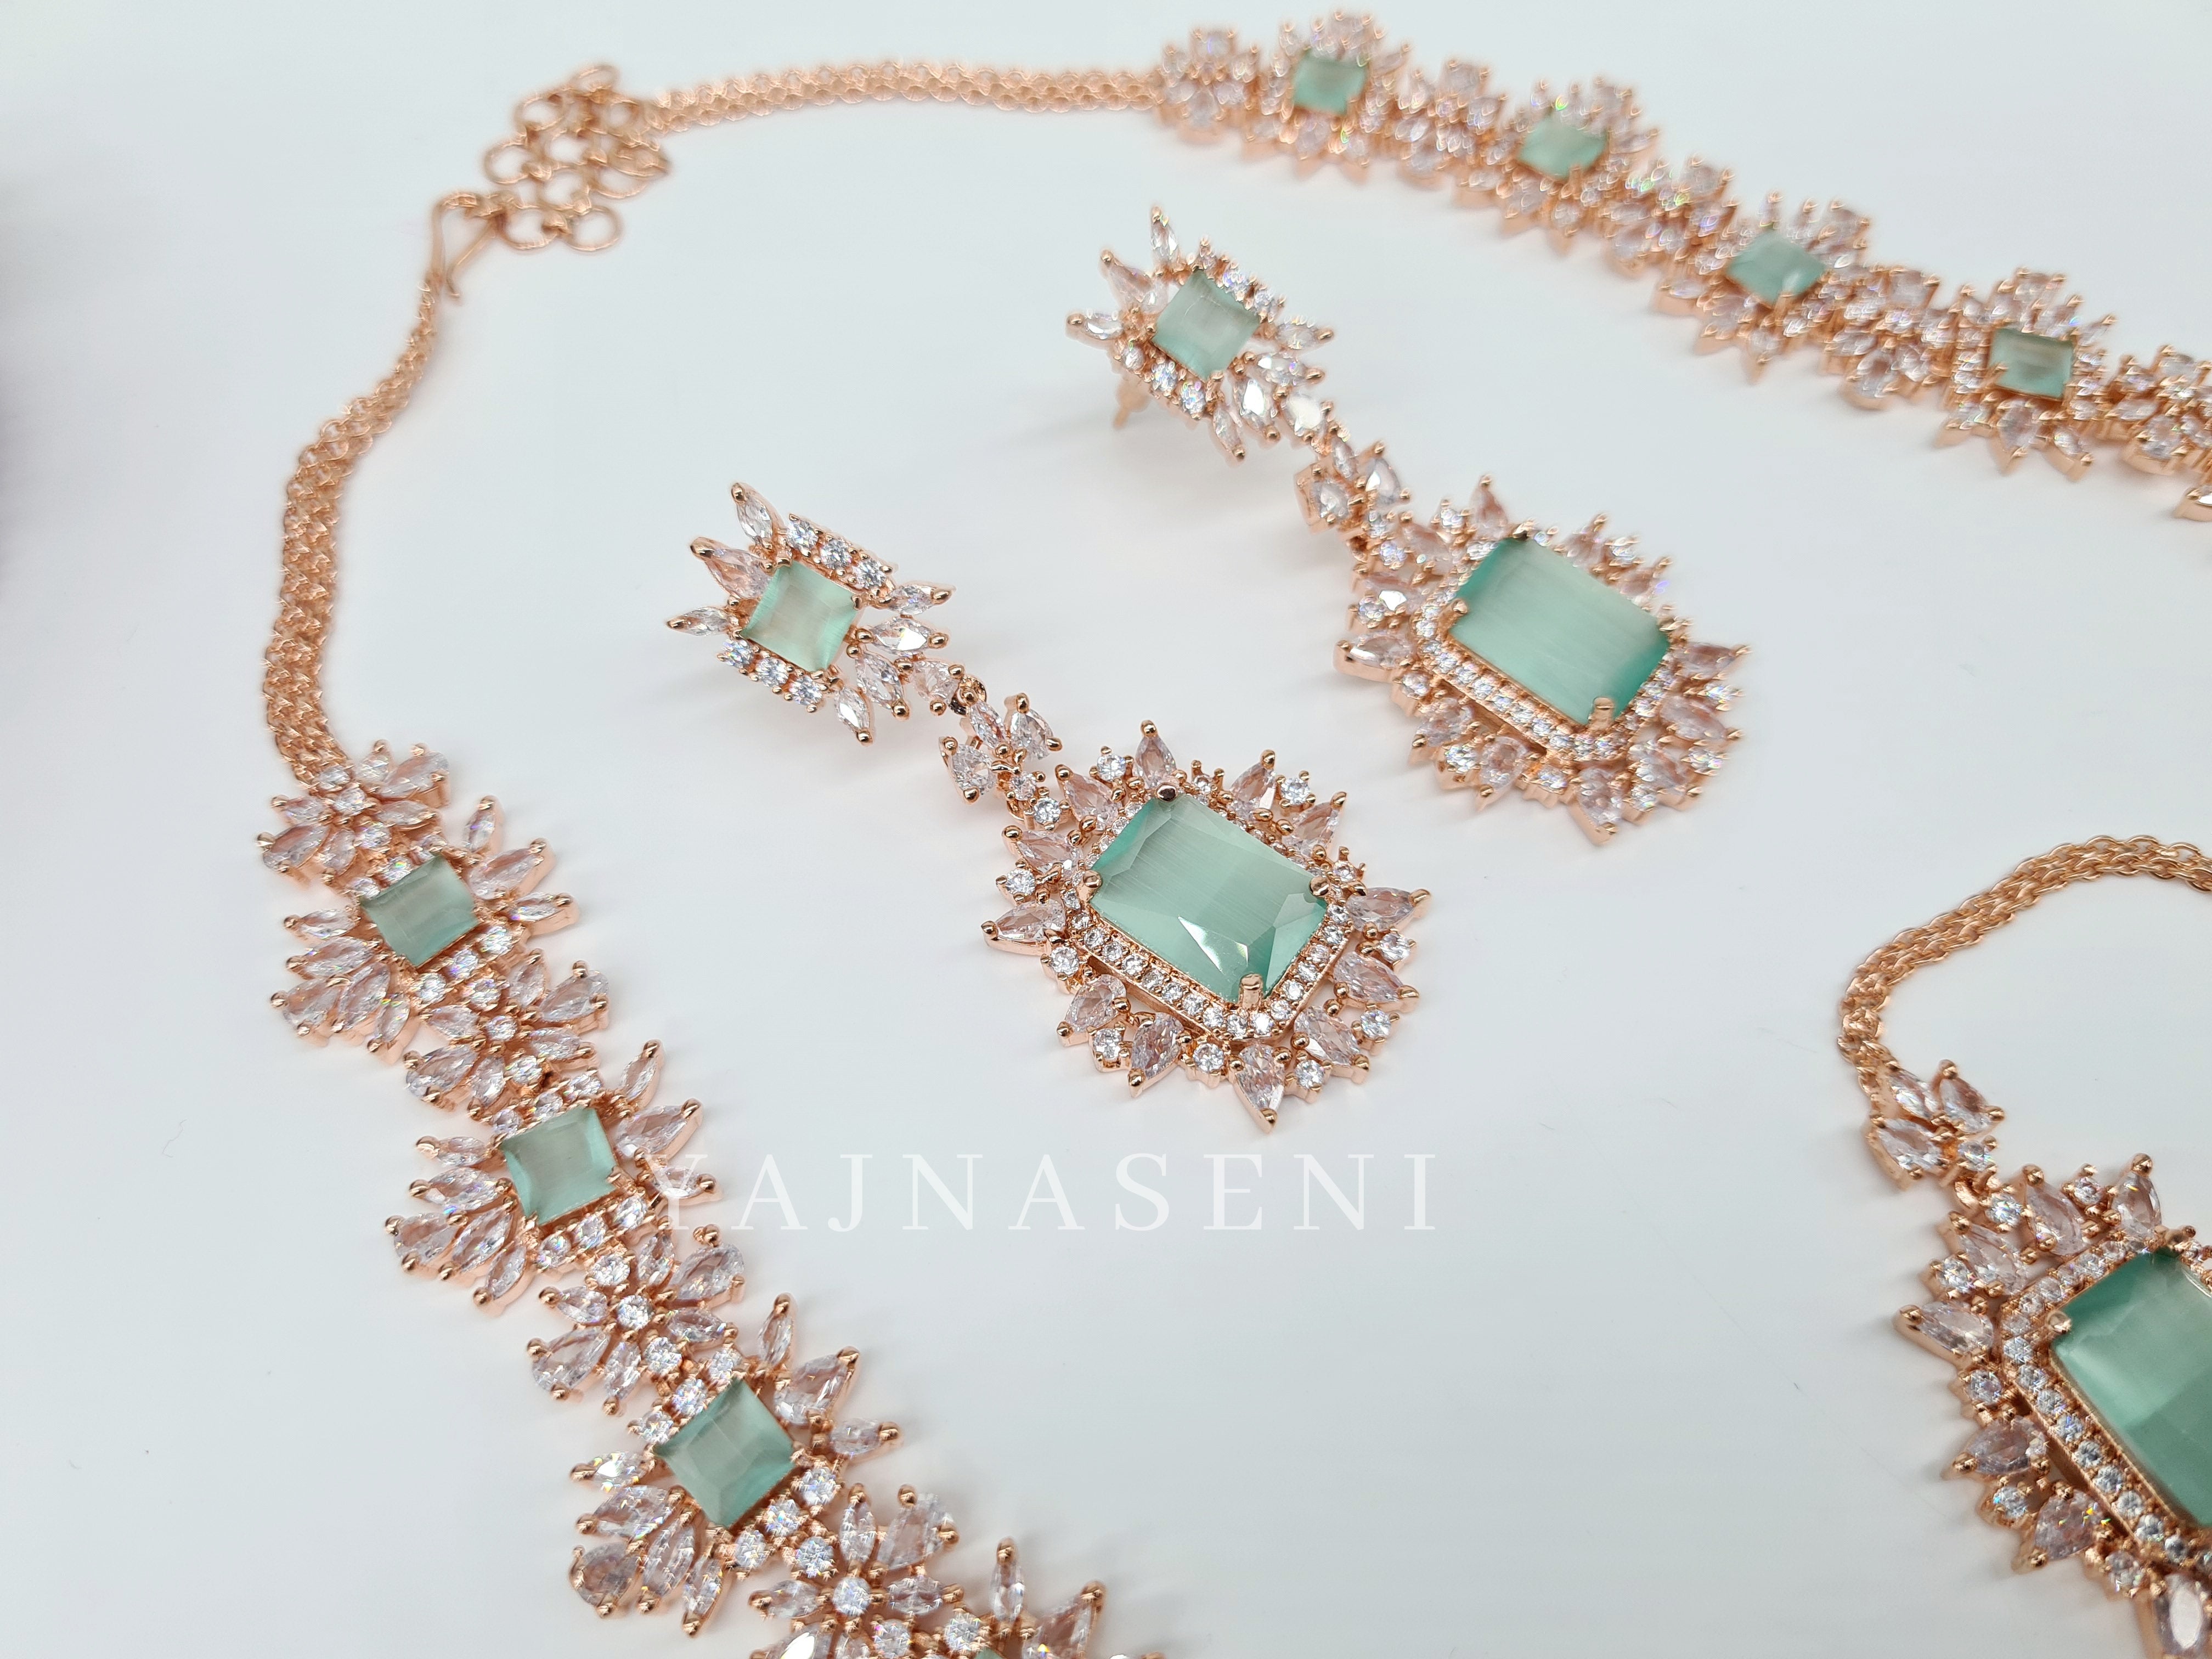 DIANA (necklace) - rosegold x mint